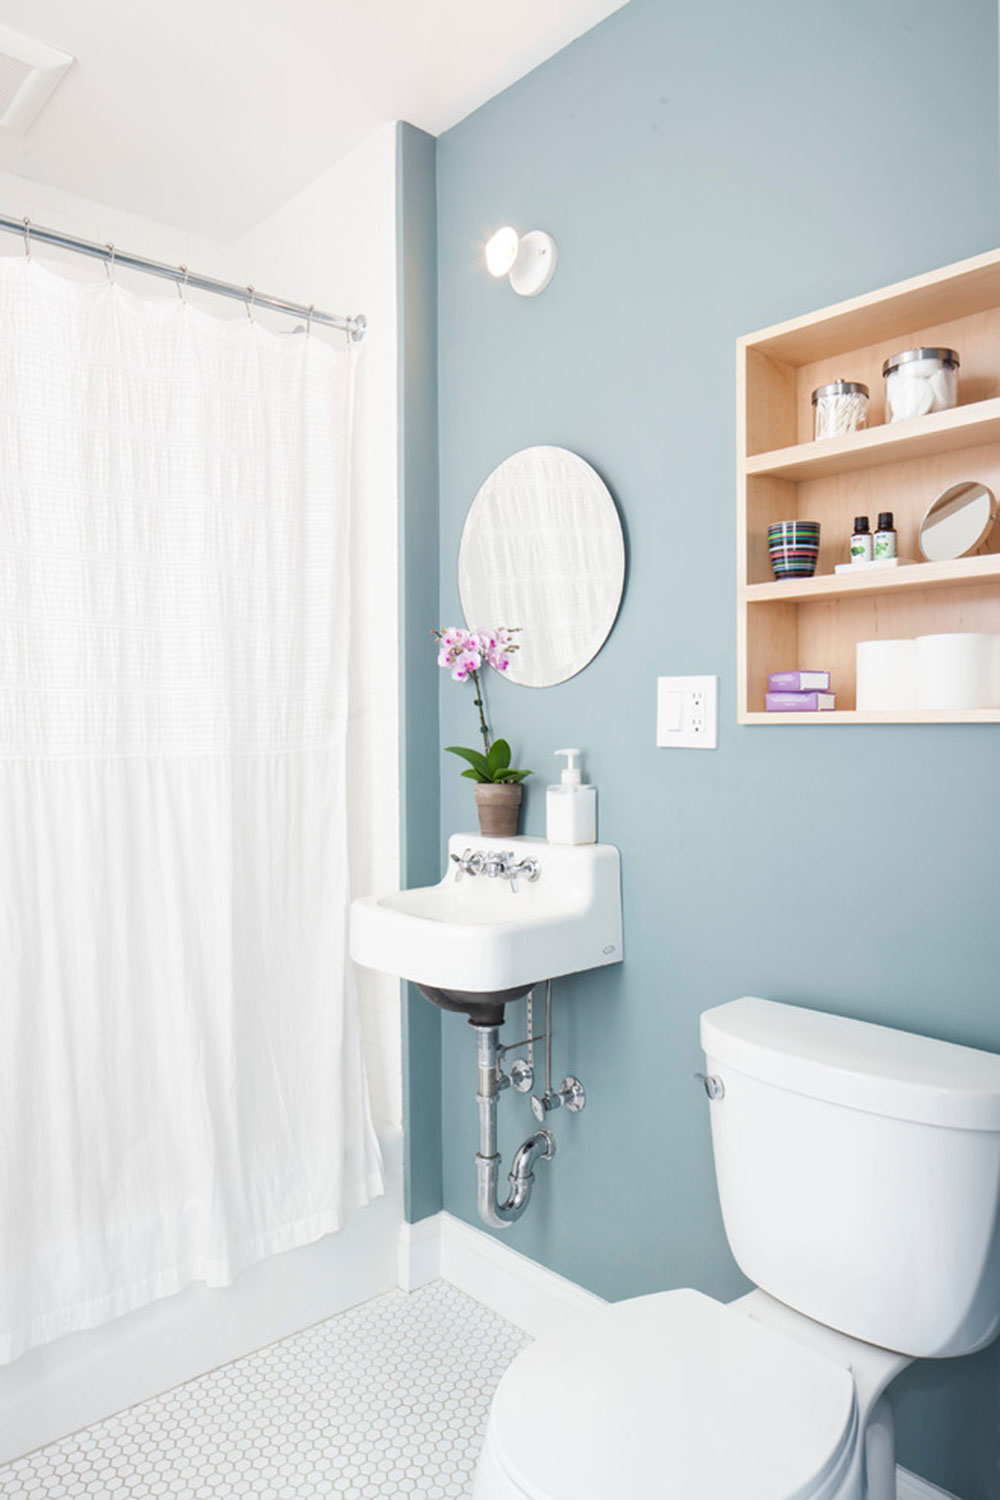 Park-Slope-Brooklyn-Rowhouse-by-BFDO-Architects-pllc Small bathroom storage ideas you shouldn’t neglect